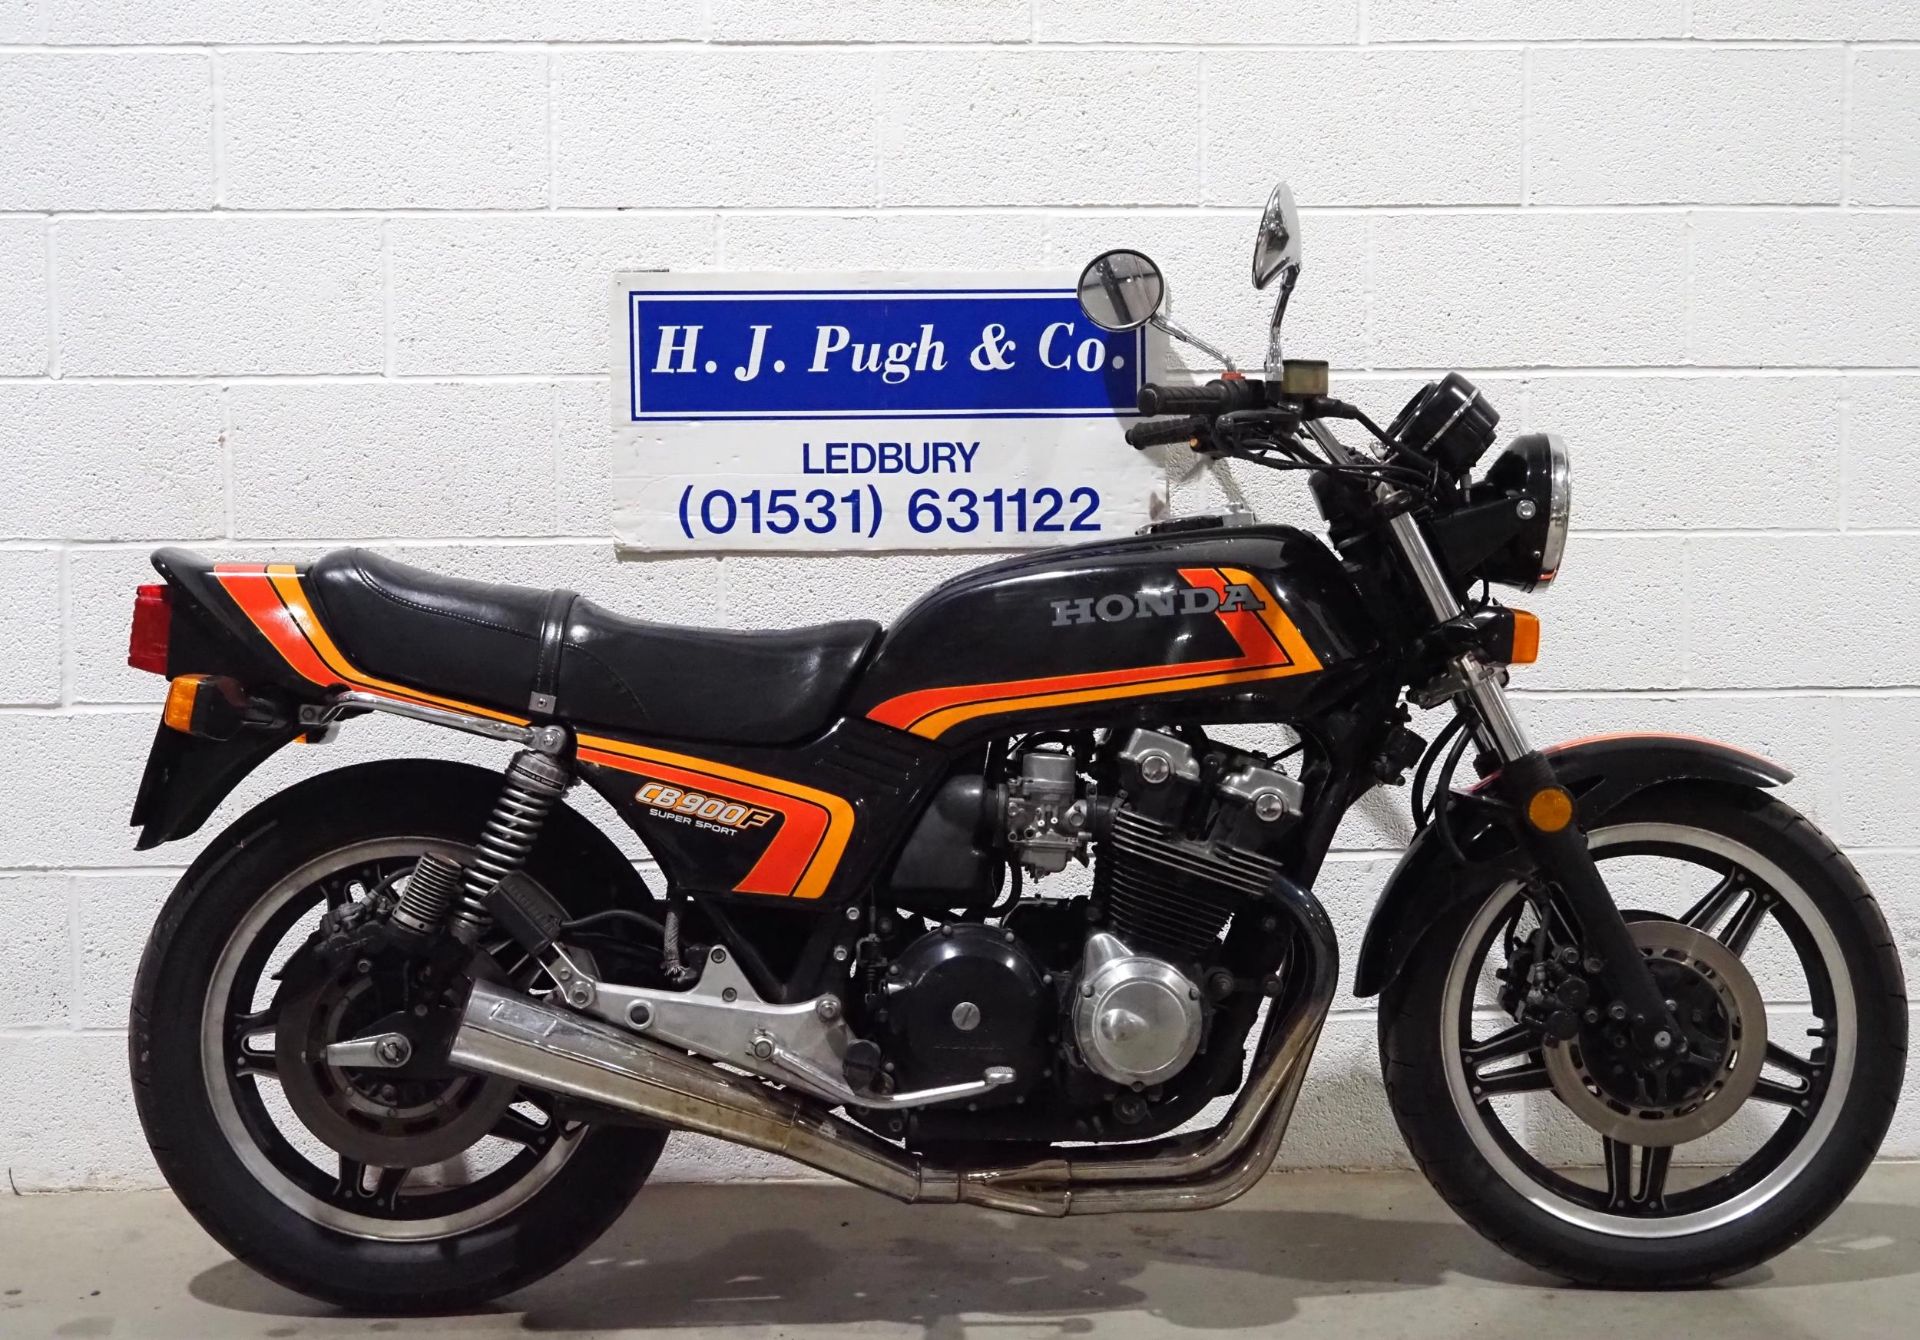 Honda CB900F SuperSport motorcycle. 1982. 901cc. Runs and rides. Recent new tyres. Comes with MOT